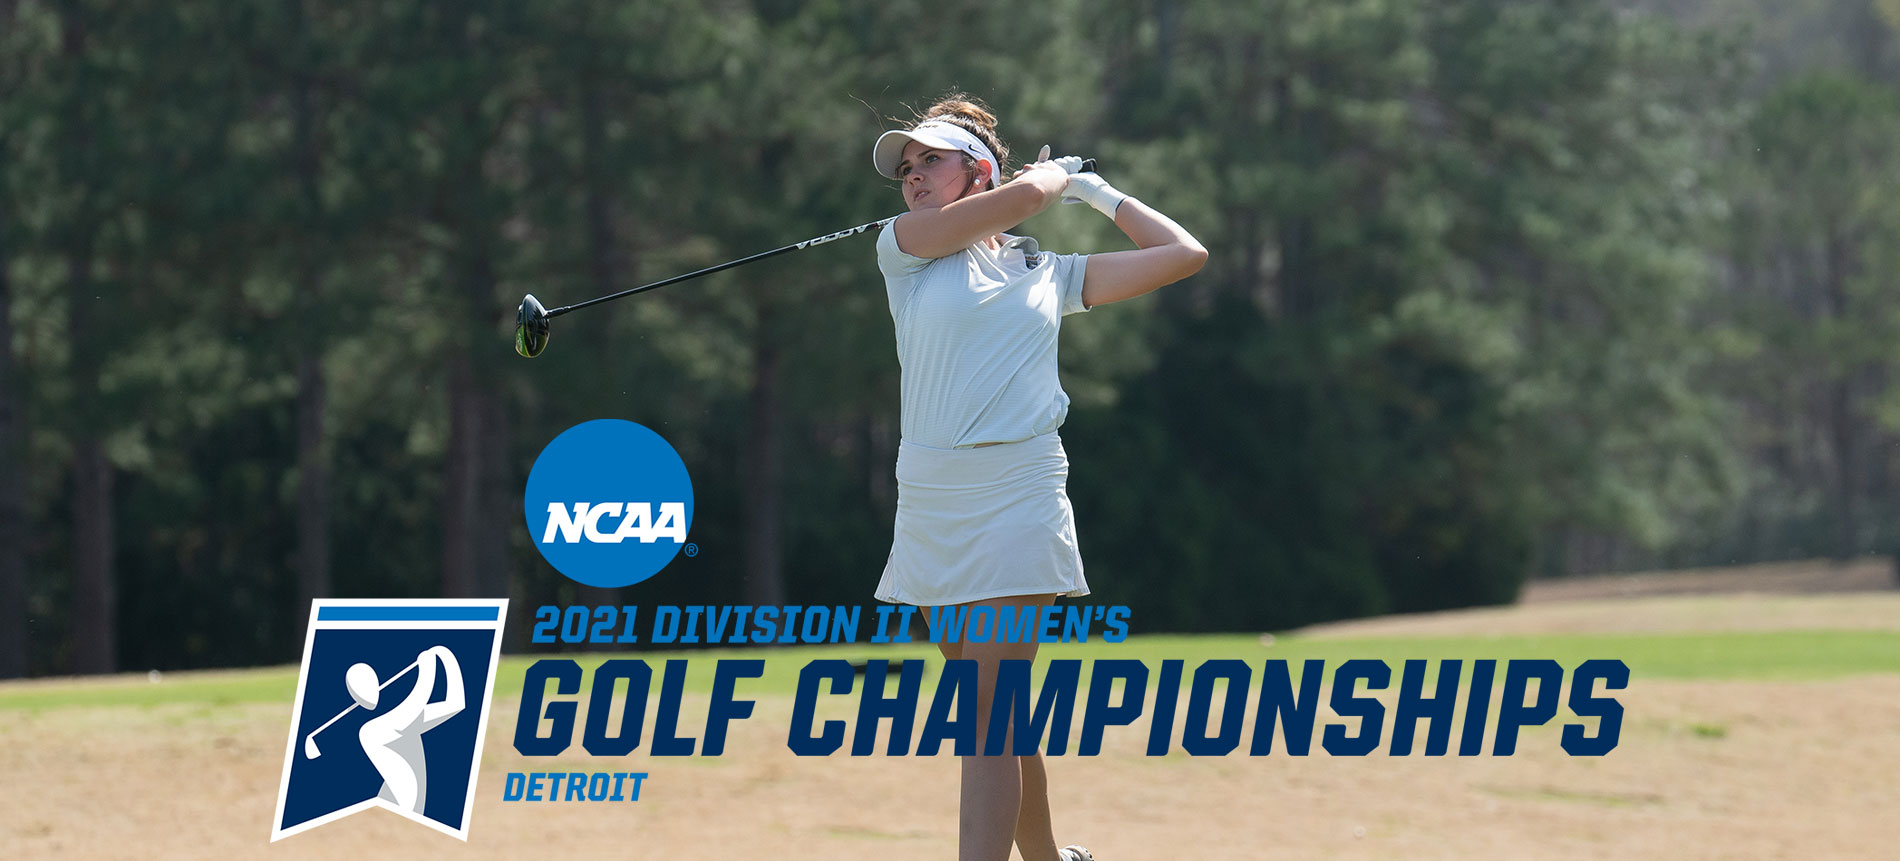 Charles Tied for 50th Place Following Second Round of NCAA Women’s Golf Championships